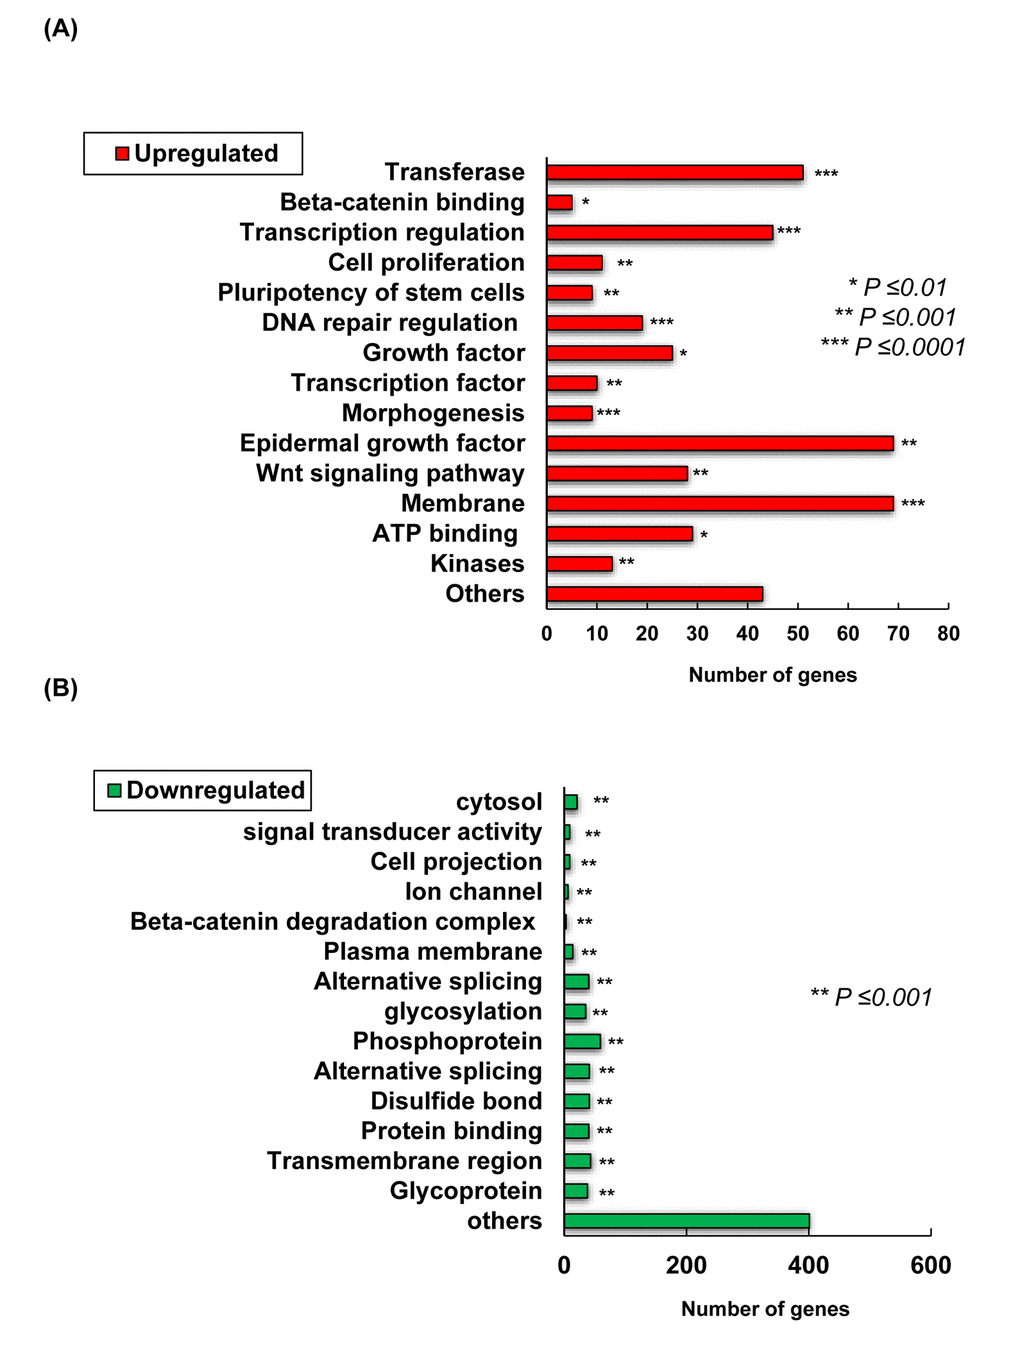  Transcriptome changes induced by TCQA, 1235 genes were significantly selected: 435 were upregulated and 800 downregulated. (A) Summary of the functional categories of upregulated genes in response to TCQA treatment. (B) Summary of the functional categories of downregulated genes in response to TCQA treatment. Analyses for the down and upregulated genes were performed individually using Database for Annotation, Visualization and Integrated Discovery v6.8 (DAVID). Bars represent the number of genes implicated in each category. *Statistically significant (P ≤0.01). **Statistically significant (P ≤0.001). ***Statistically significant (P ≤0.0001). 